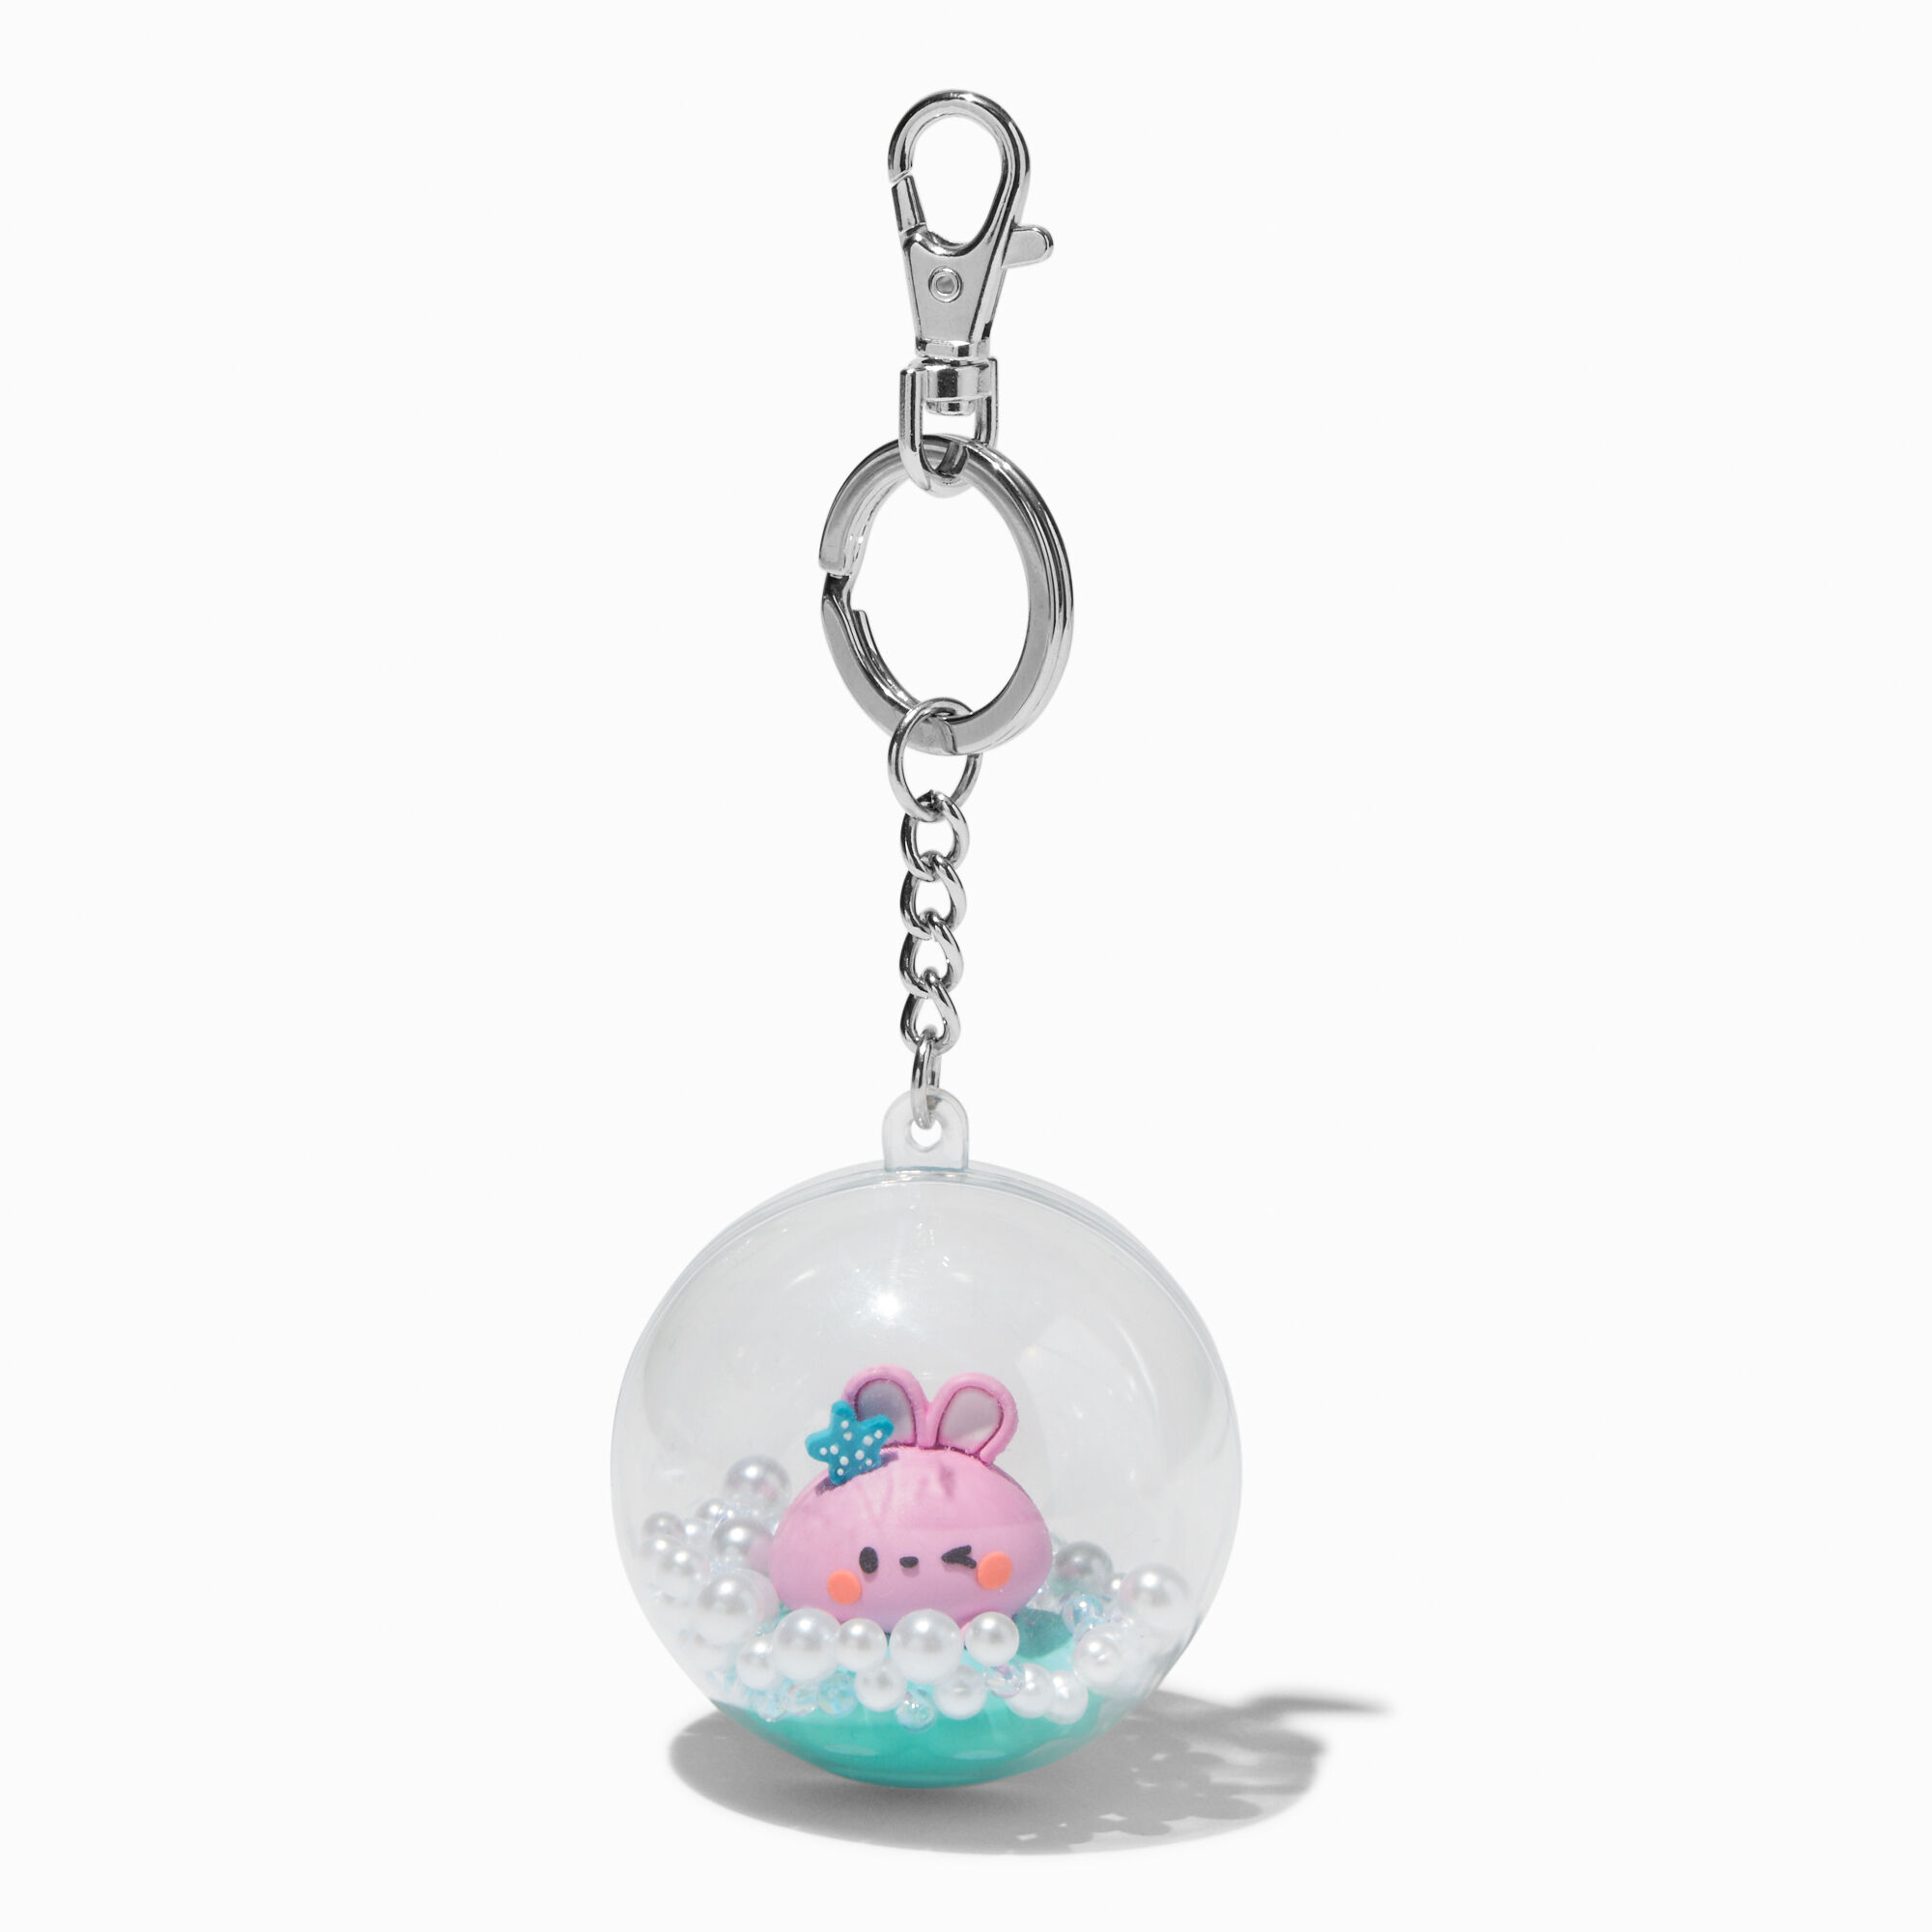 View Claires Shaker Bunny Keyring information